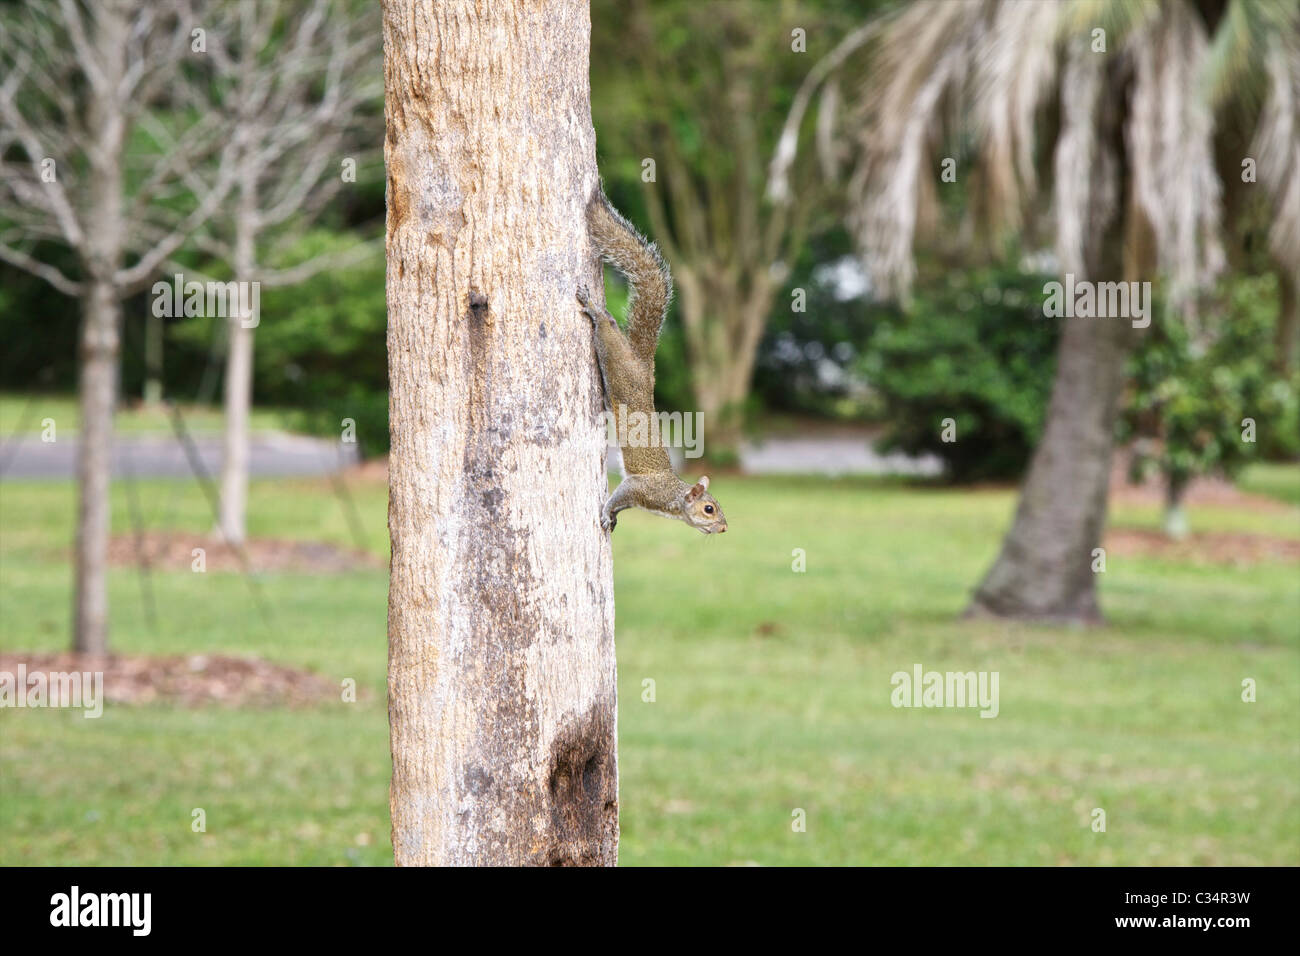 An Eastern Gray Squirrel (Sciurus carolinensis) is in an alert position on the trunk of a palm tree. Stock Photo